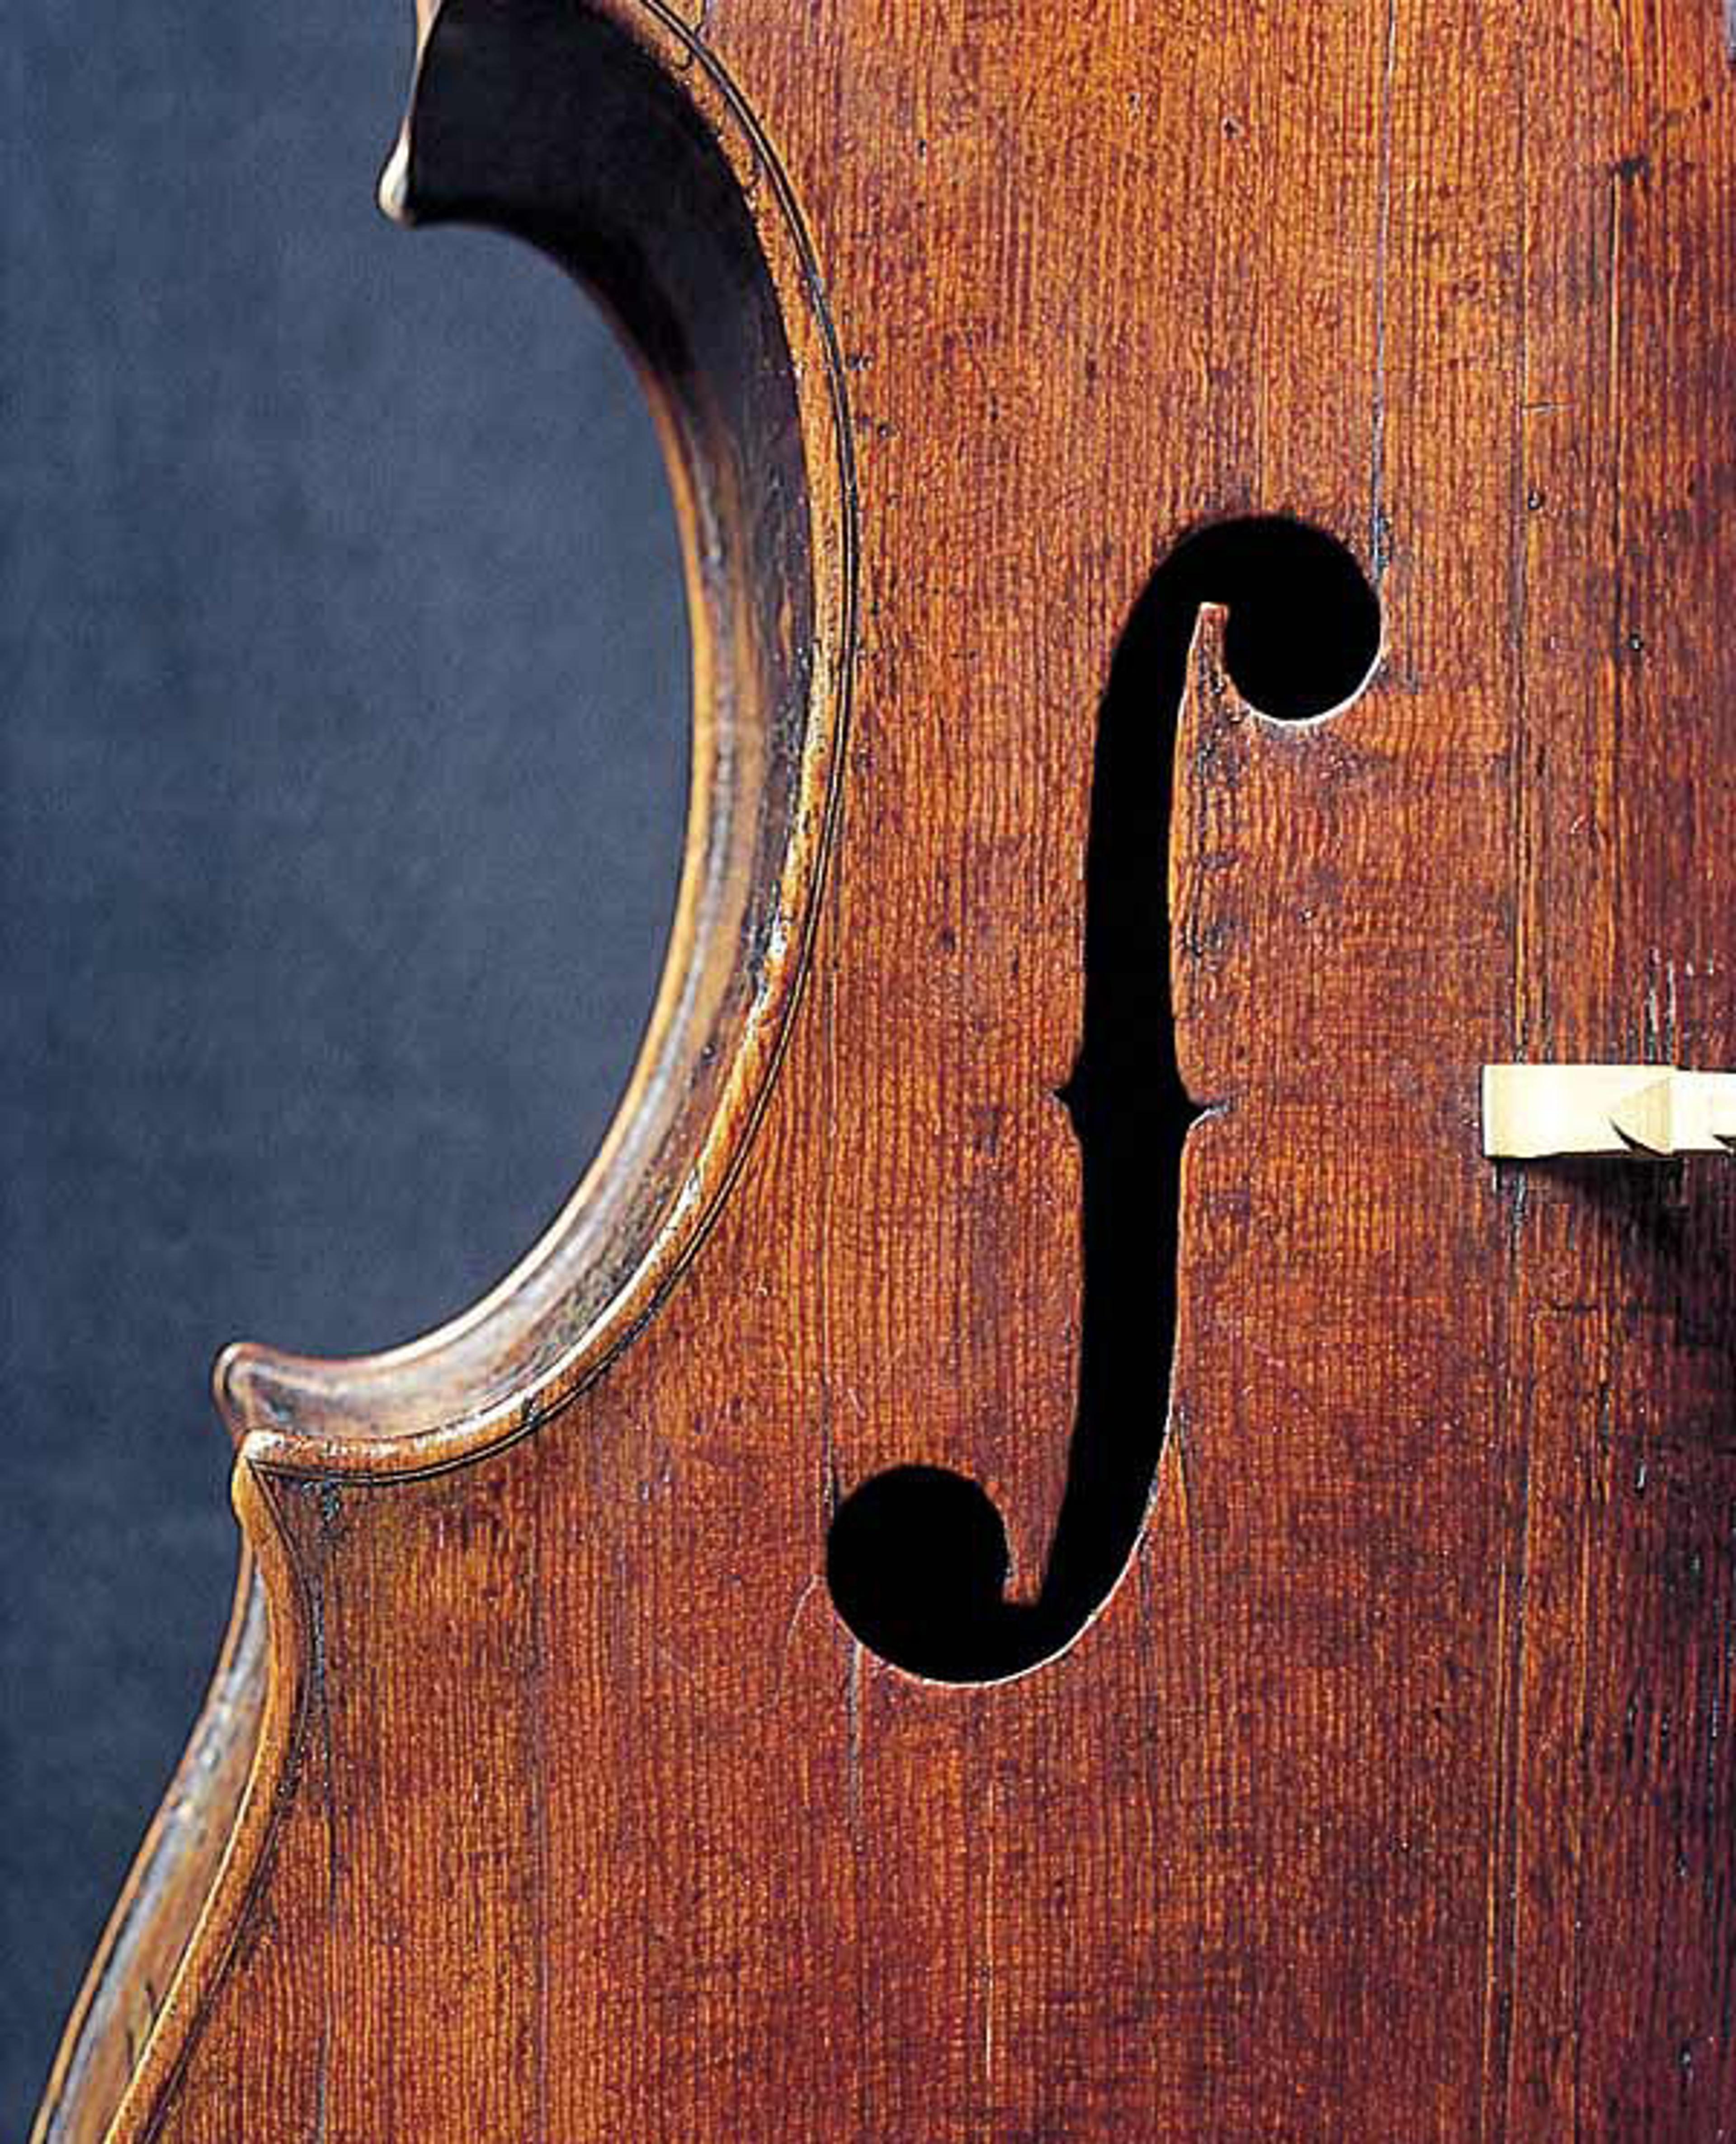 Andrea Amati (Italian, ca. 1505–1578). Violoncello, "The King" (detail), mid-16th century. National Music Museum, Vermillion, South Dakota, Witten-Rawlins Collection, 1984 (NMM 3351)